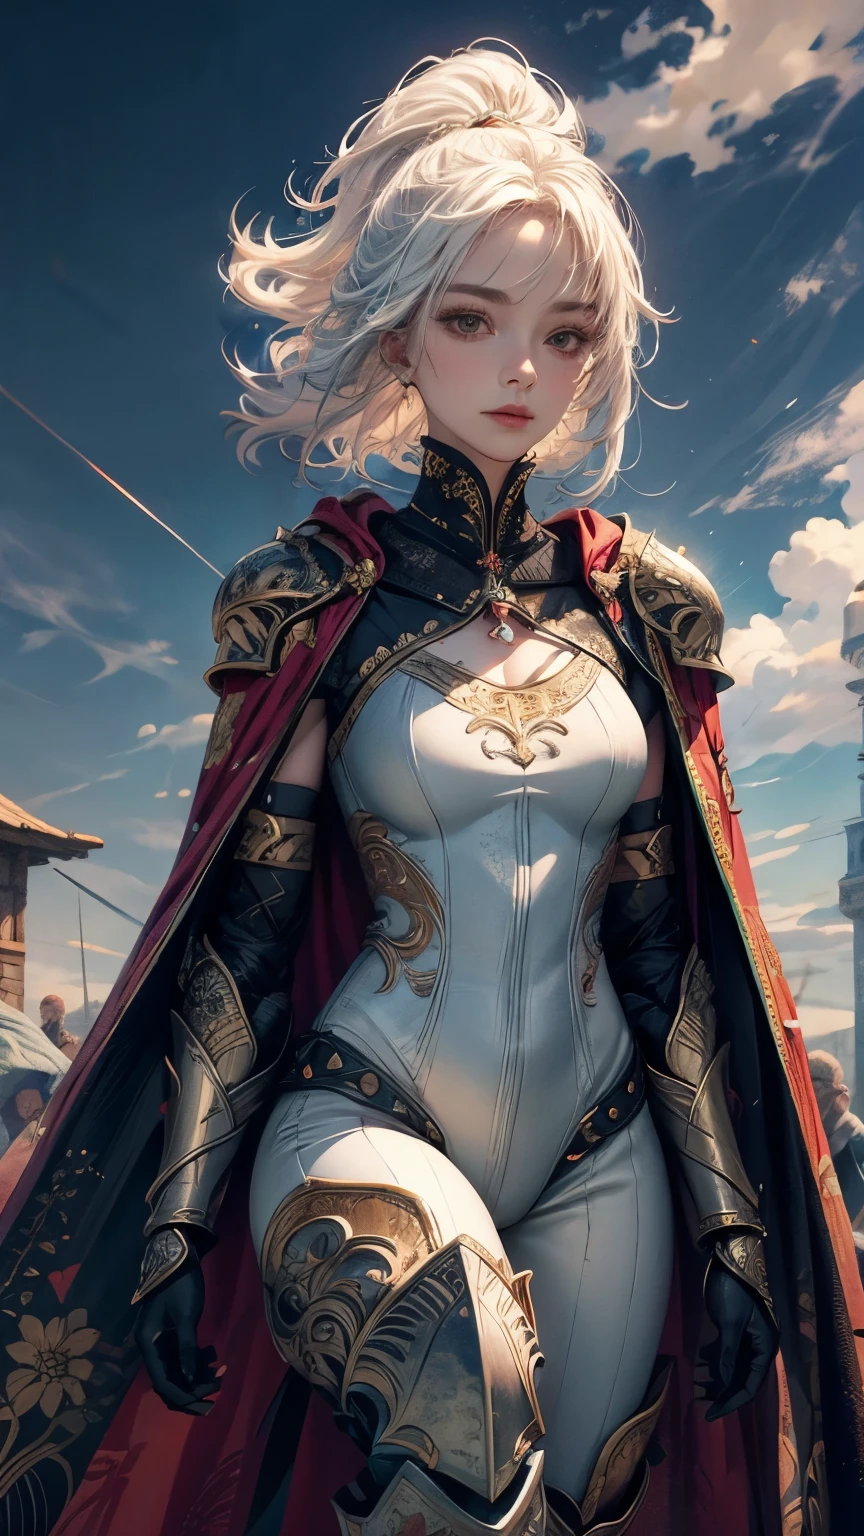 best quality, masterpiece, ultra high res,female warrior saint, embroided flowing cape, intricate armor with symbolic elements that is battle-worn yet resplendent, extreme detail, 4k,white hair, long eyelashes, bodysuit shapewear, bustles,armor and oni mask, knee guards
